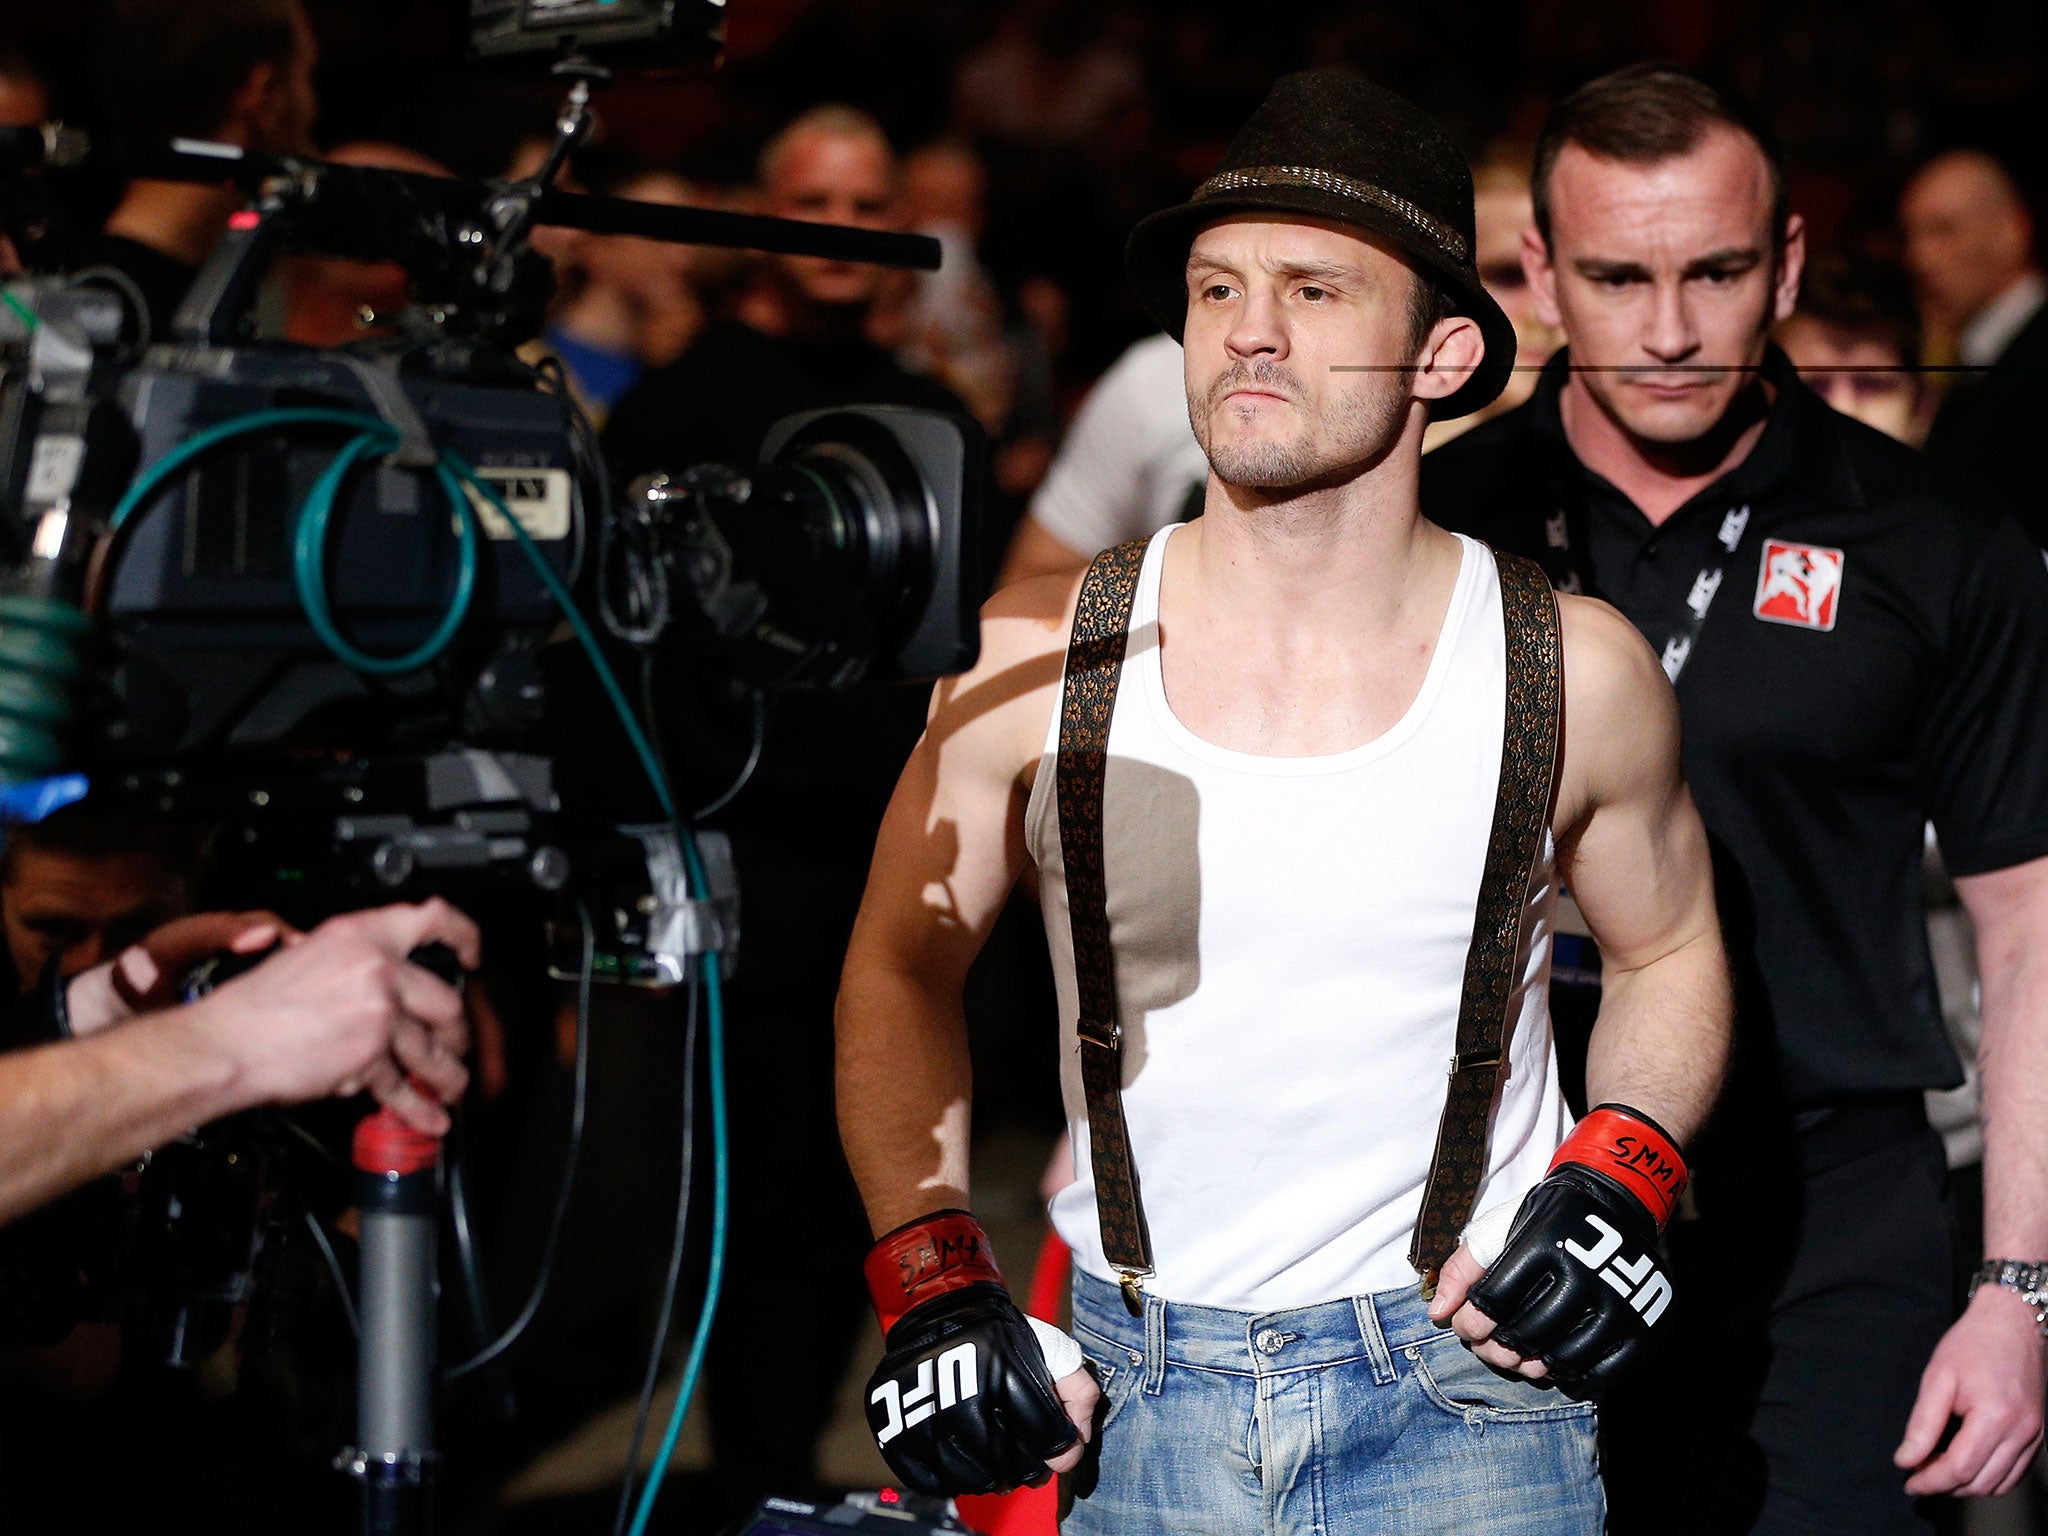 Brad Pickett enters the arena in trademark trilby and vest